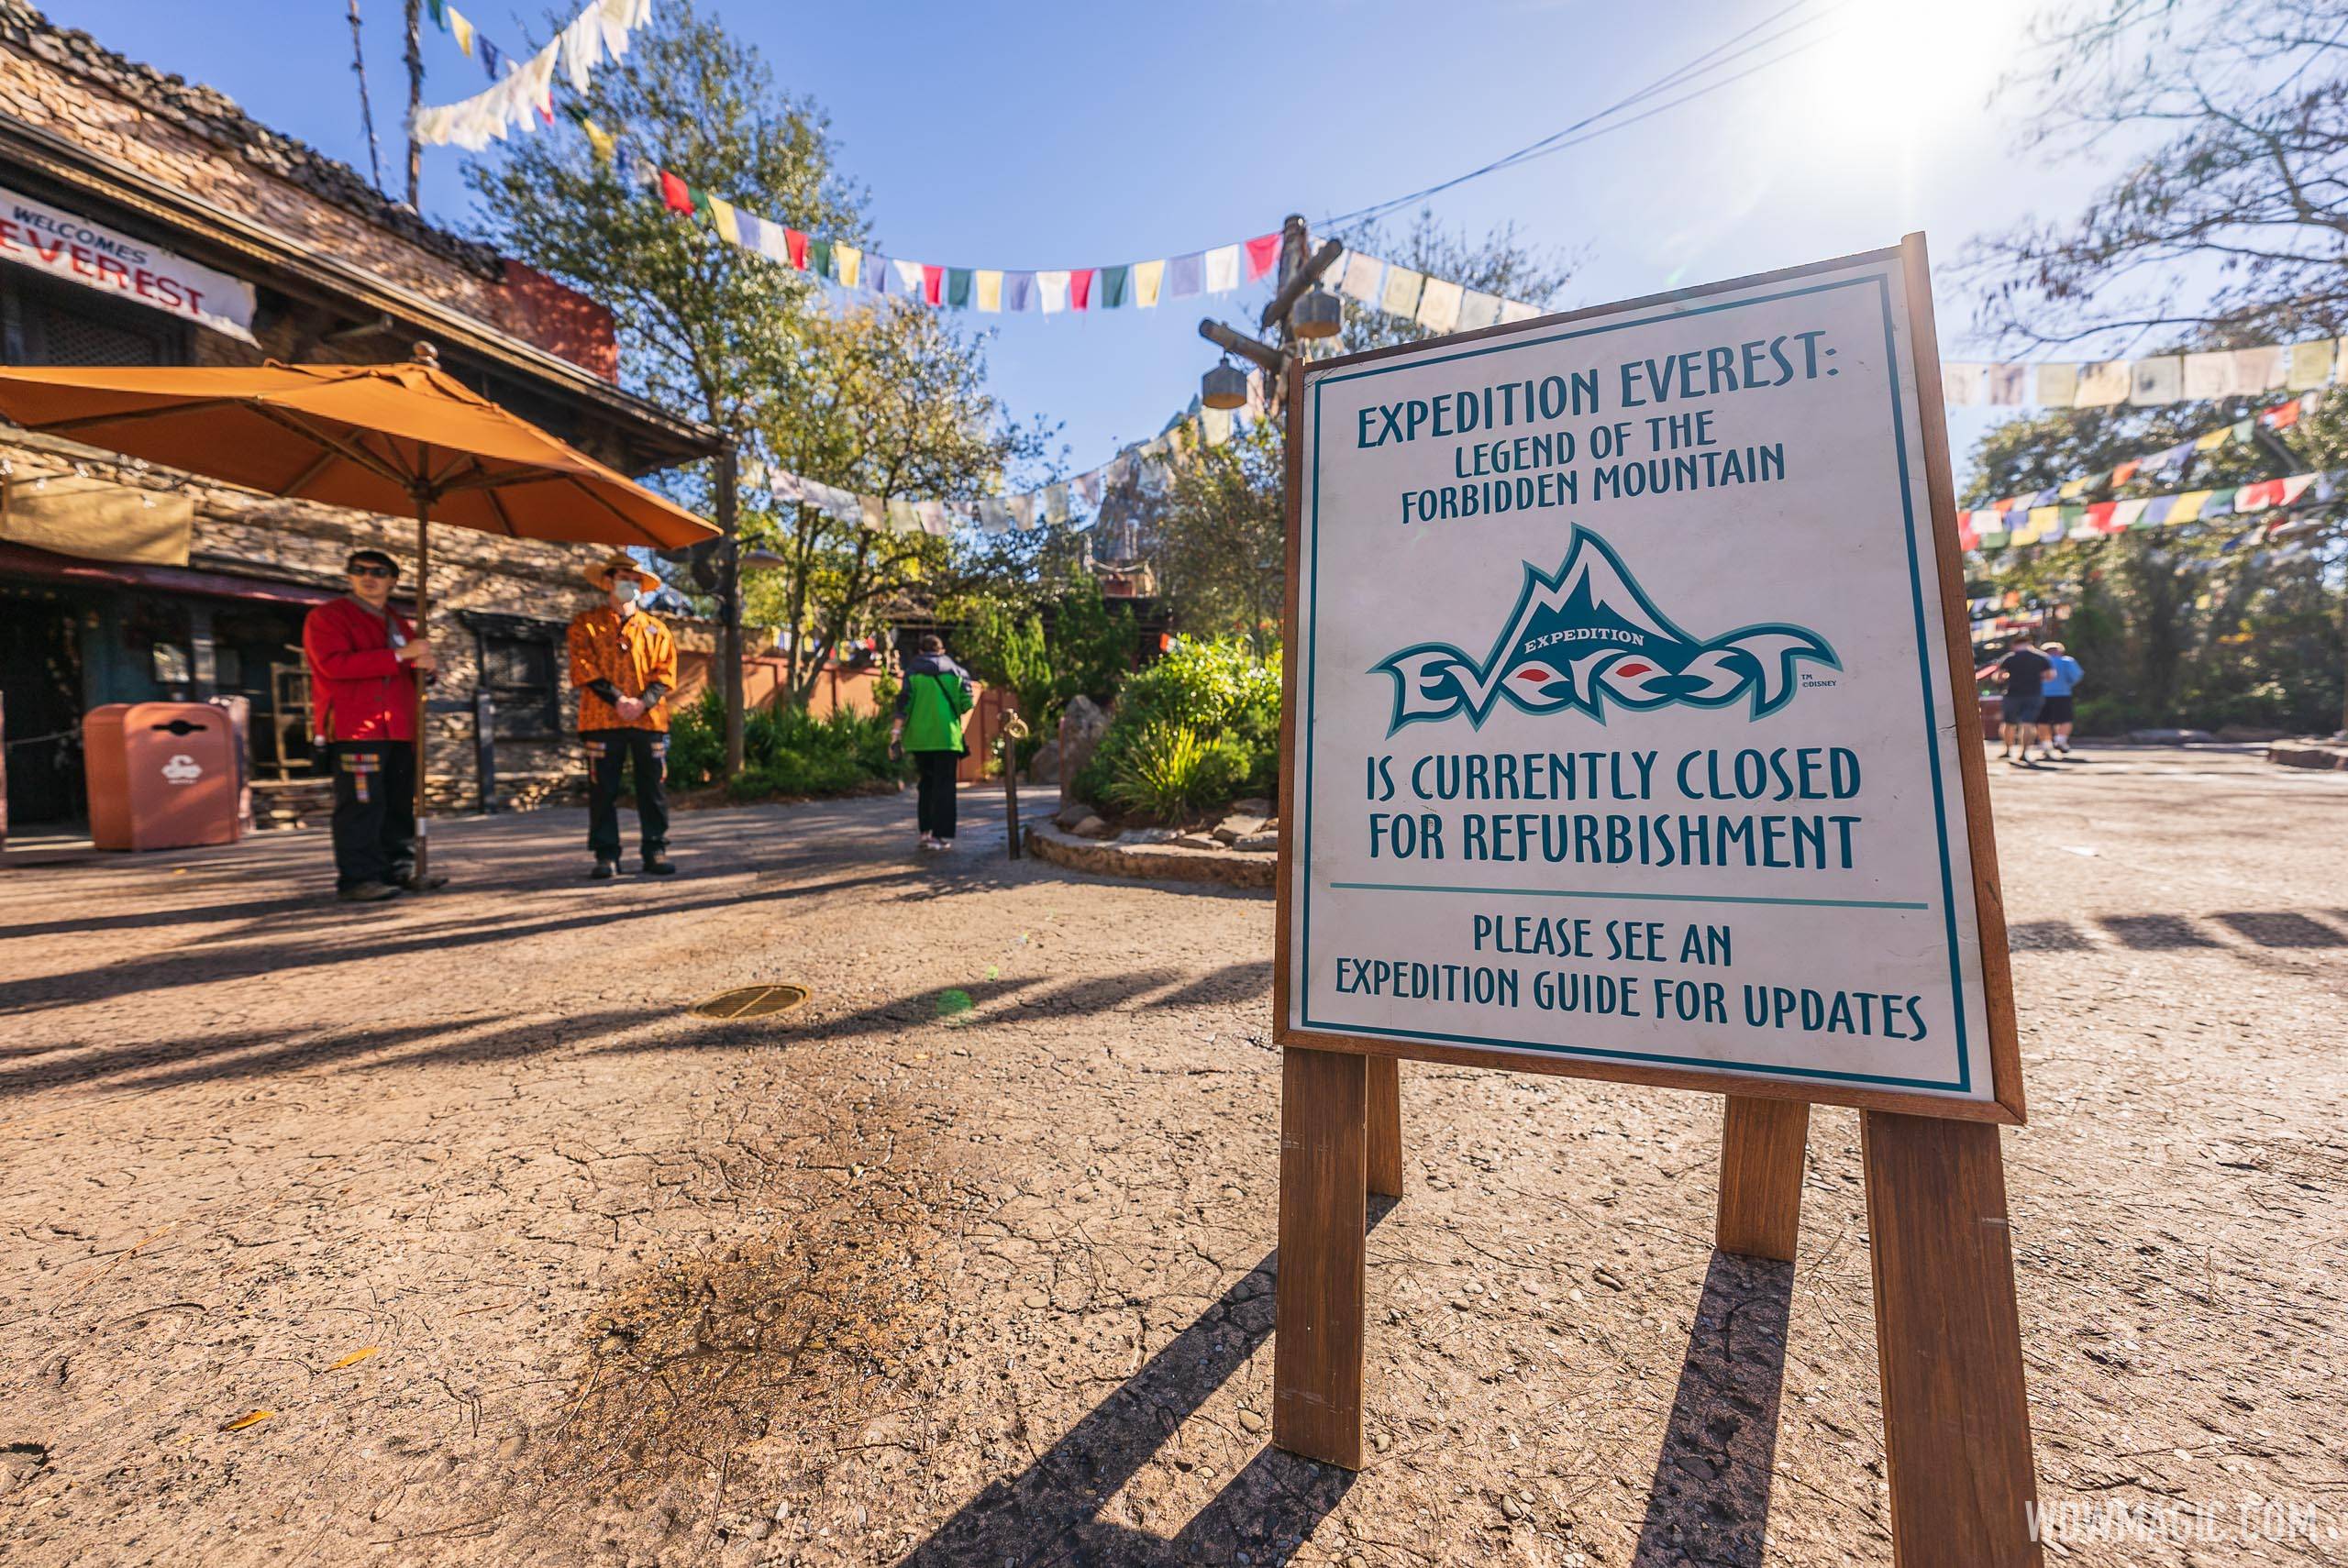 Expedition Everest to reopen on schedule following a lengthy refurbishment and will return as a Genie+ selection